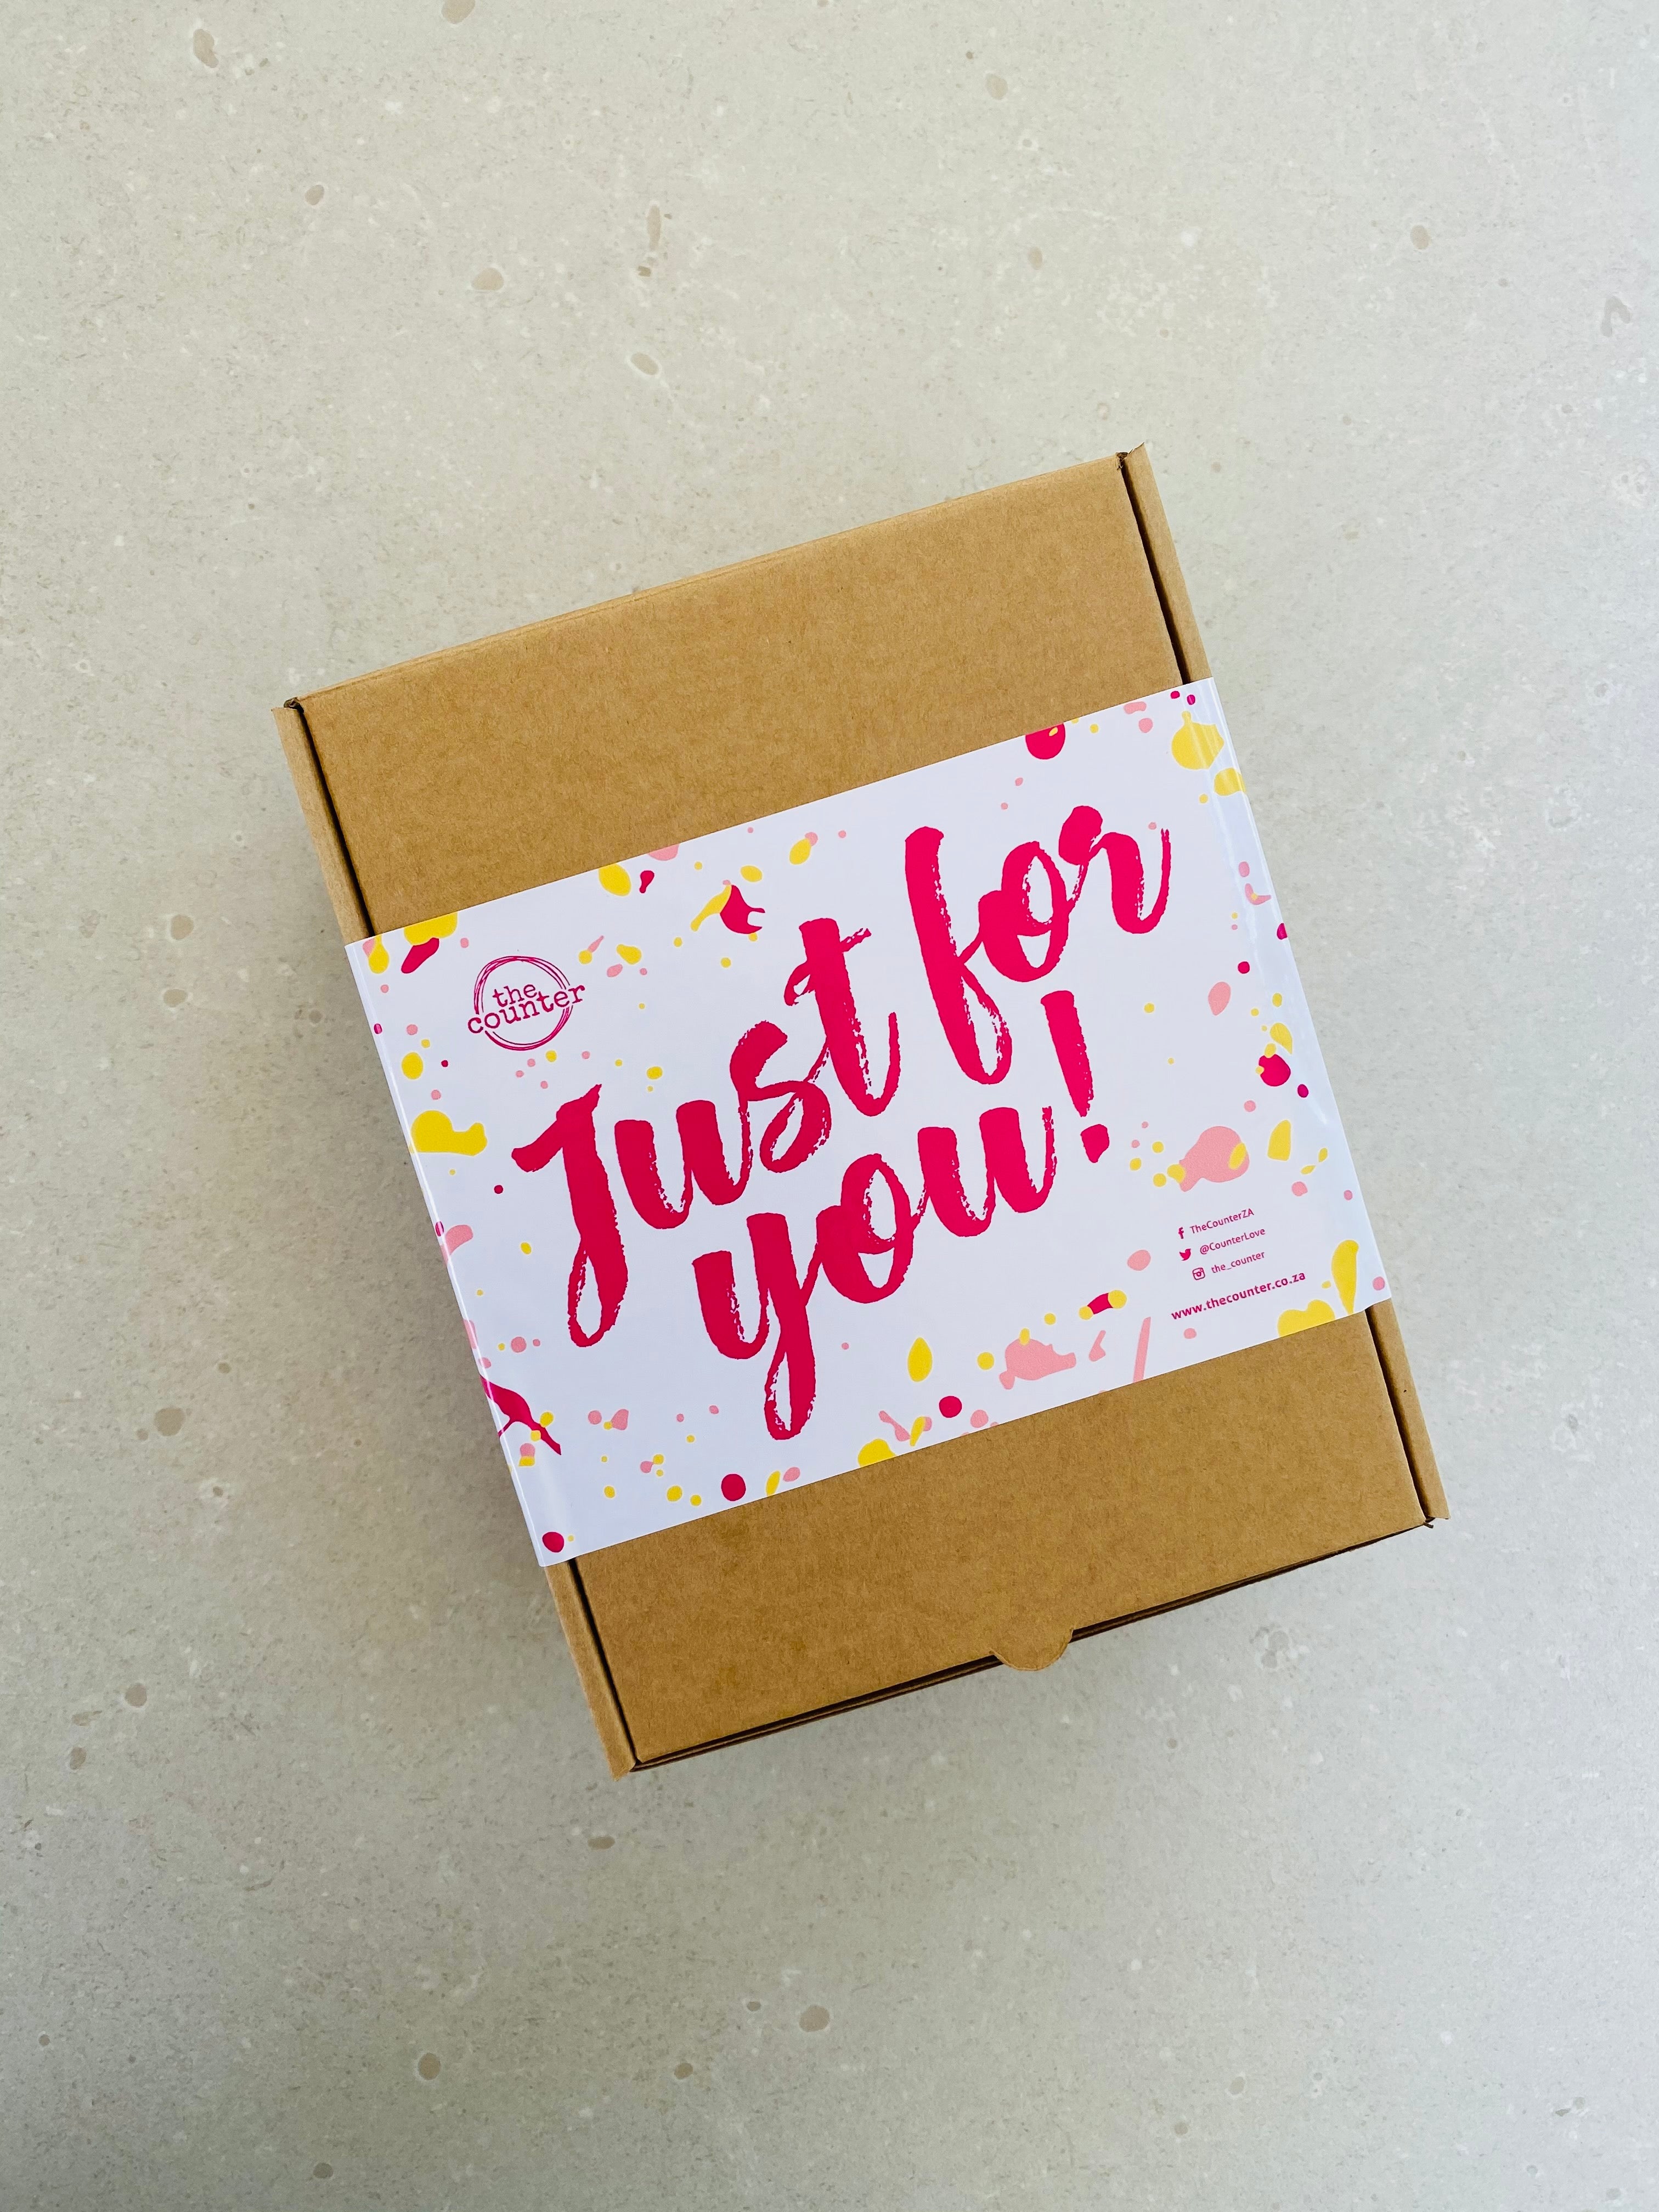 A brown gift box sits on a neutral surface. It is finished with a large, brightly coloured sticker with the text 'Just for You!' written in cerise pink. The sticker is decorated with brightly coloured paint splashes in cerise, light pink and yellow - with The Counter' logo in the top left of the sticker.